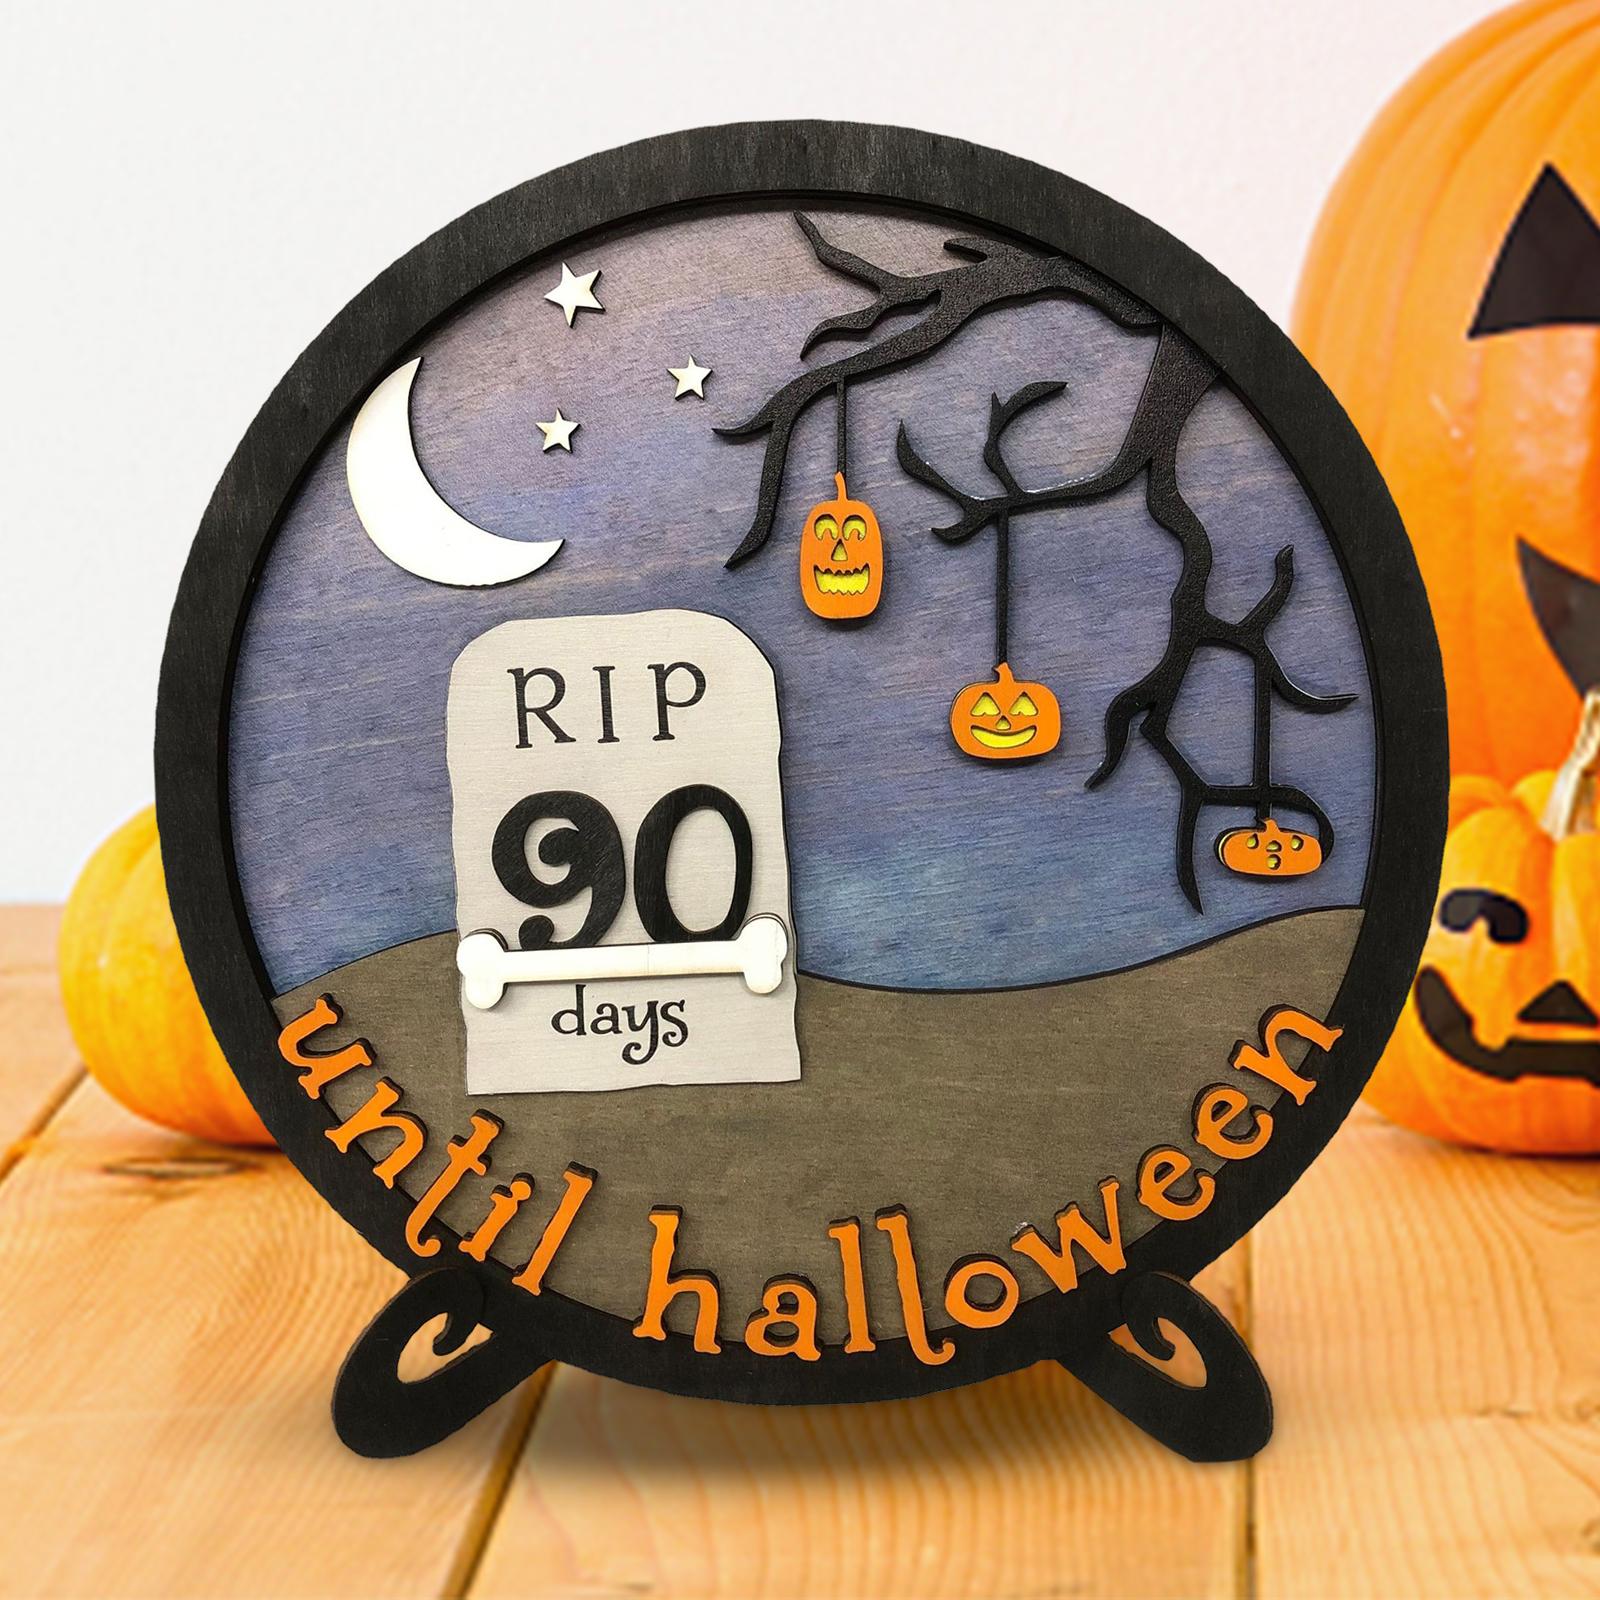 Halloween Calendar Board Crafts Party Favors for Home Haunted House Festival